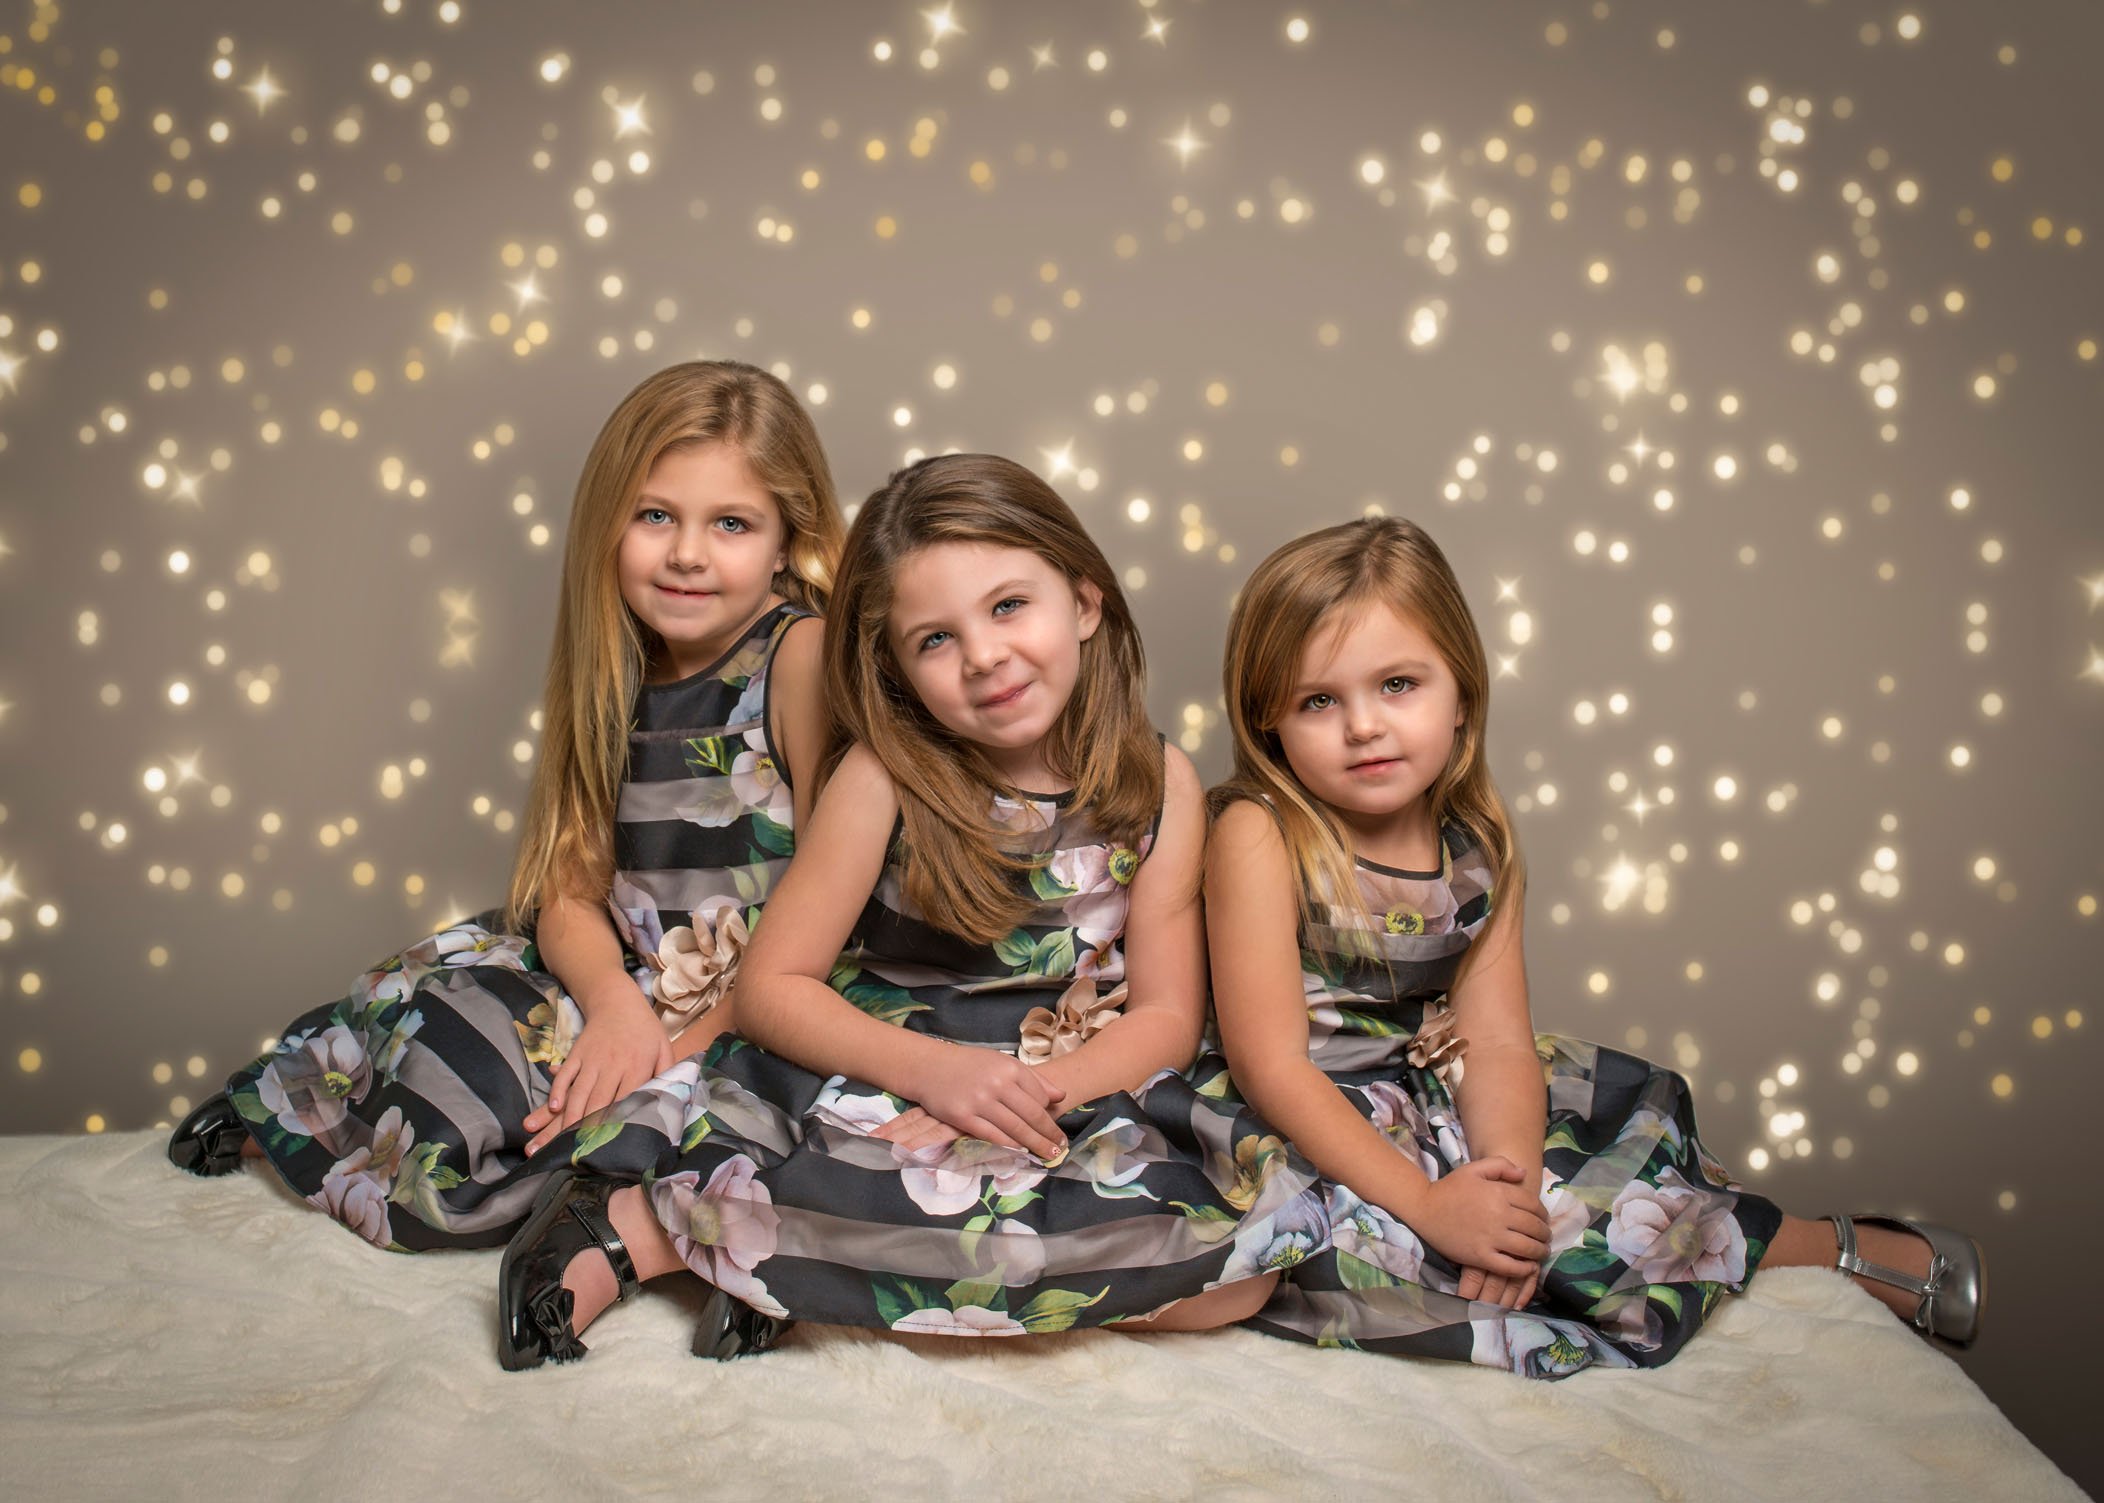 3 young sisters sitting in pretty dresses with bokeh lights behind them